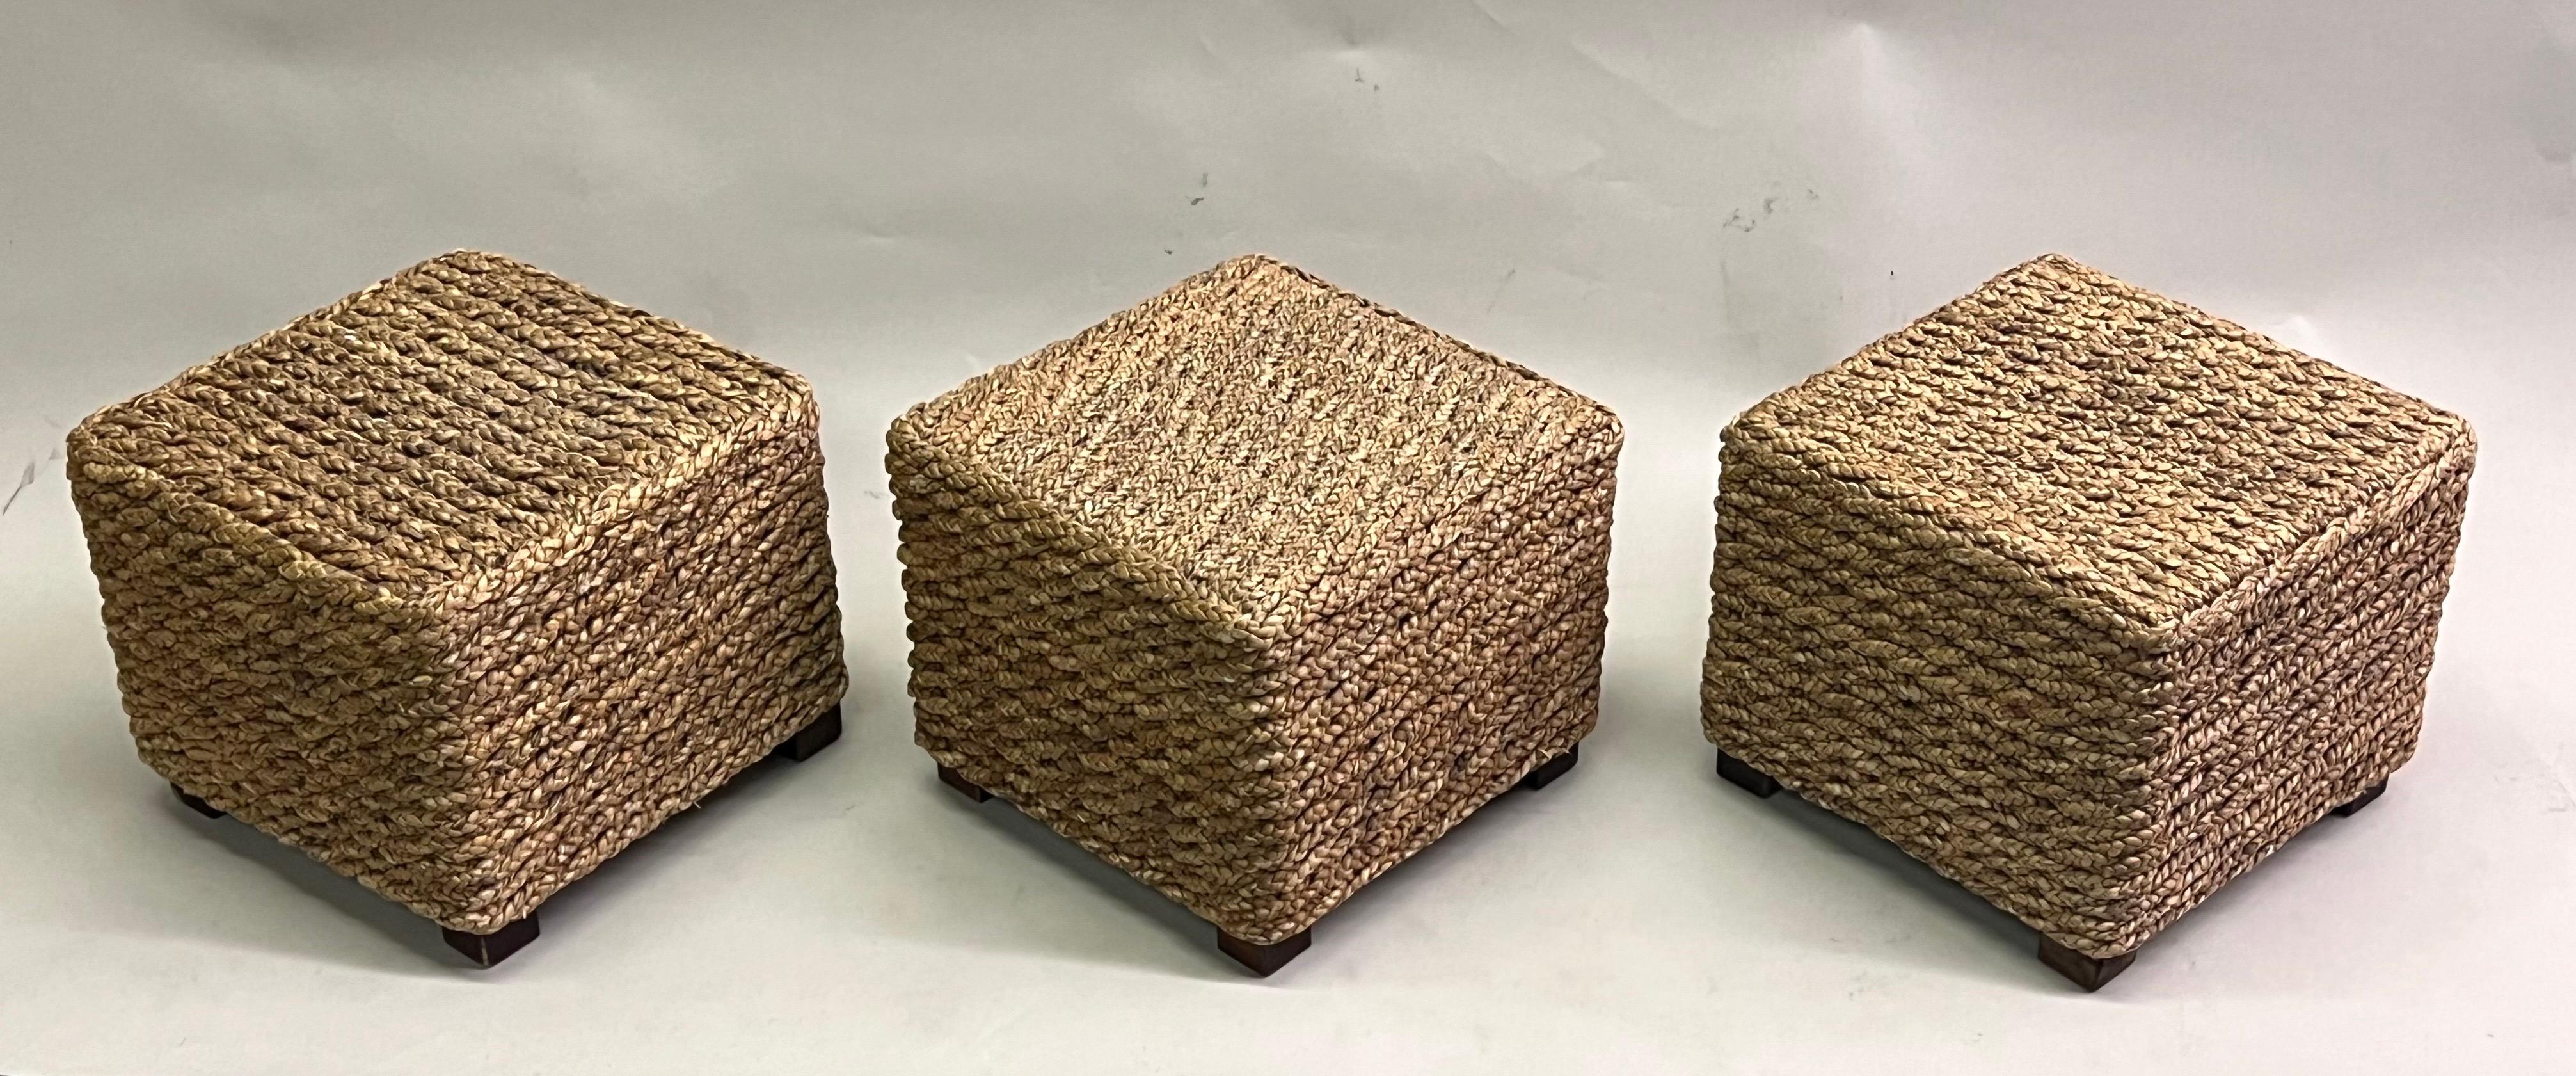 Pair of French Mid-Century Rope Stools / Benches by Adrien Audoux & Frida Minet For Sale 9